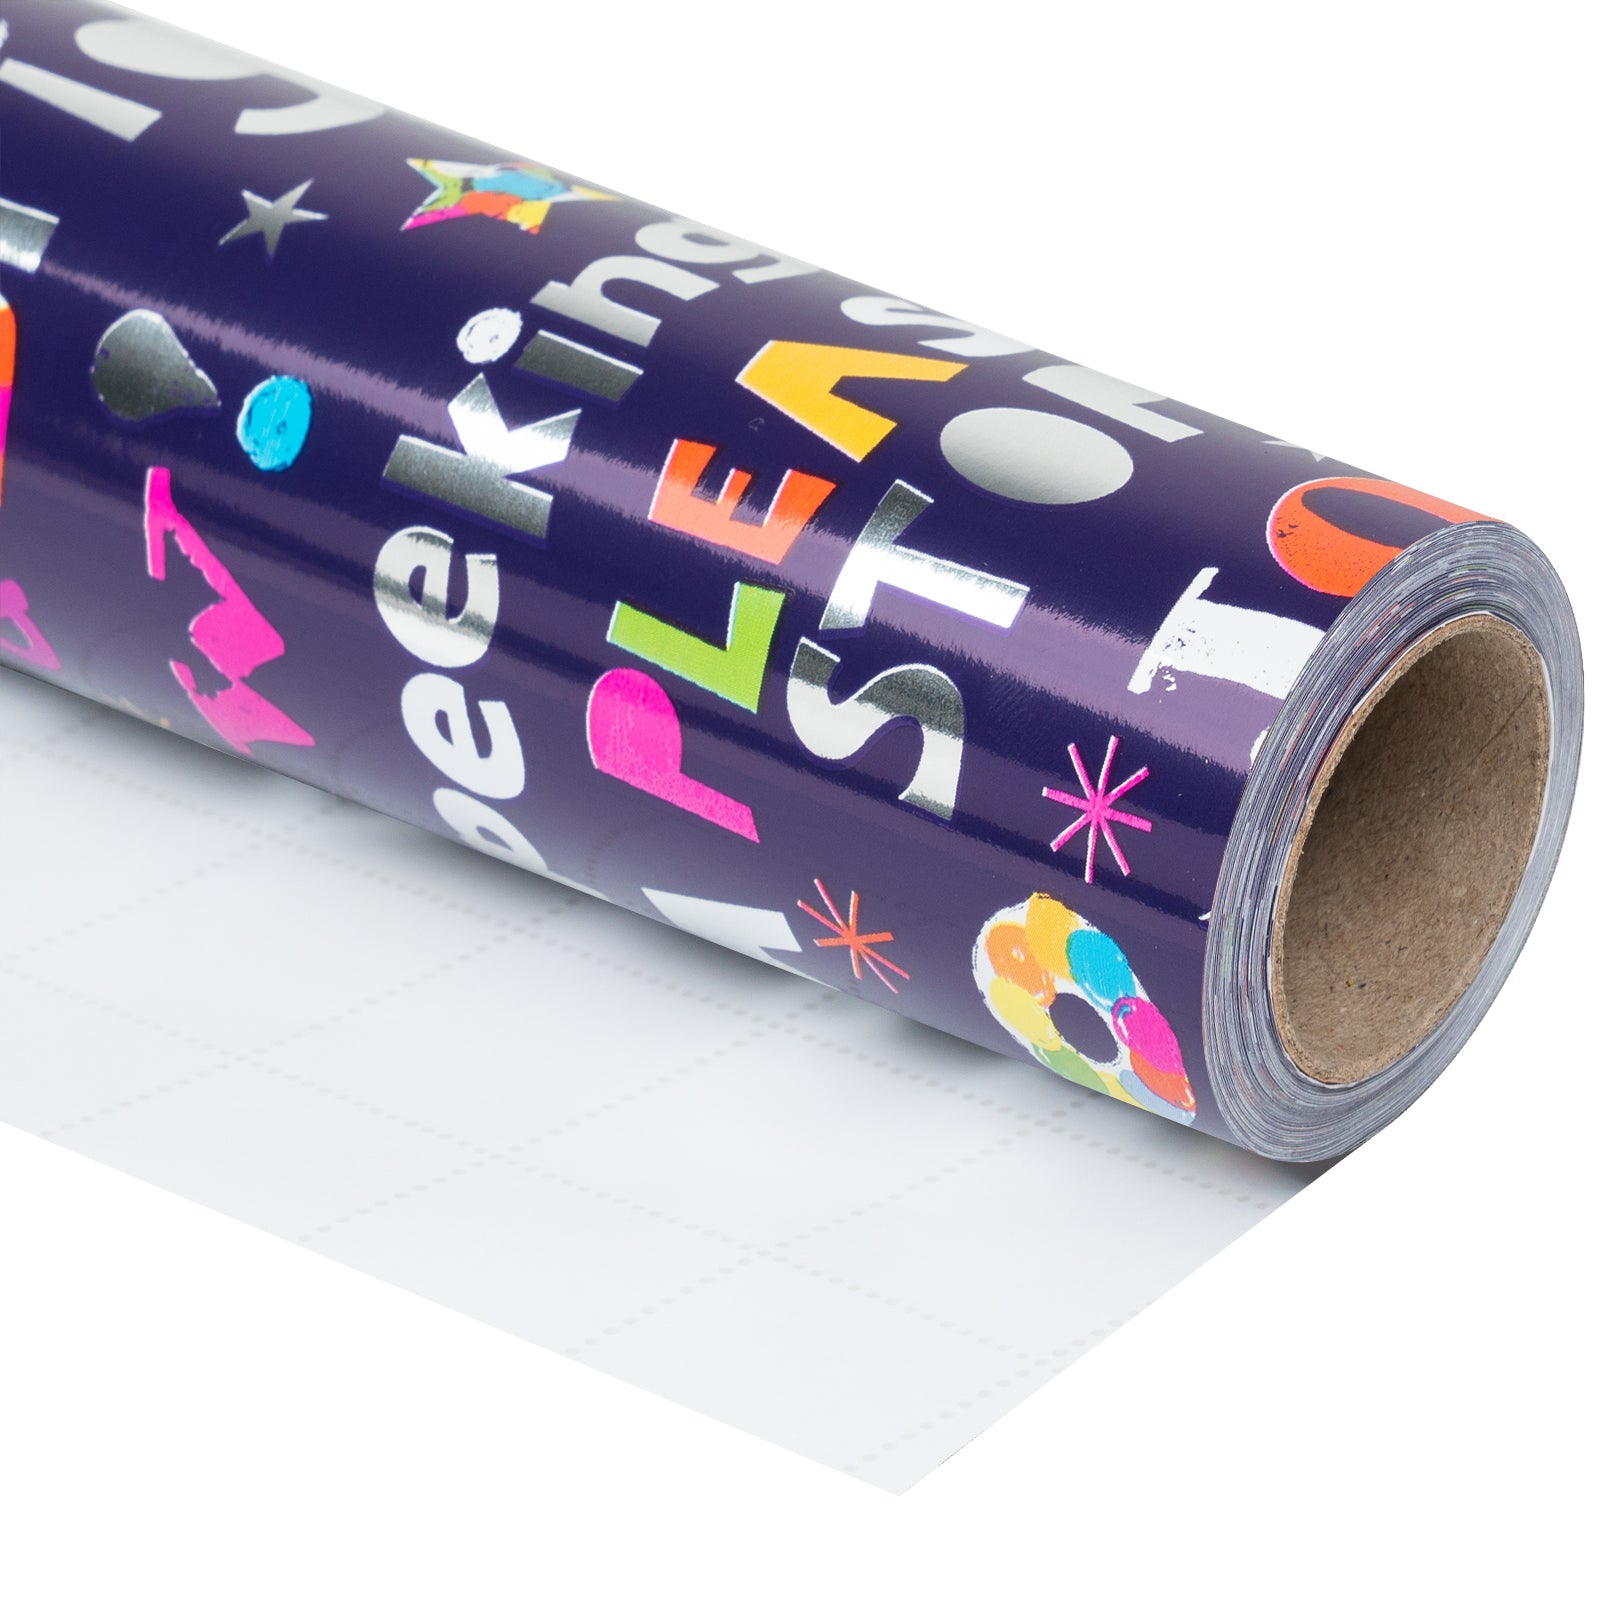 Deep Blue Let It Snow Foil Wrapping Paper Roll Wholesale Wrapholic